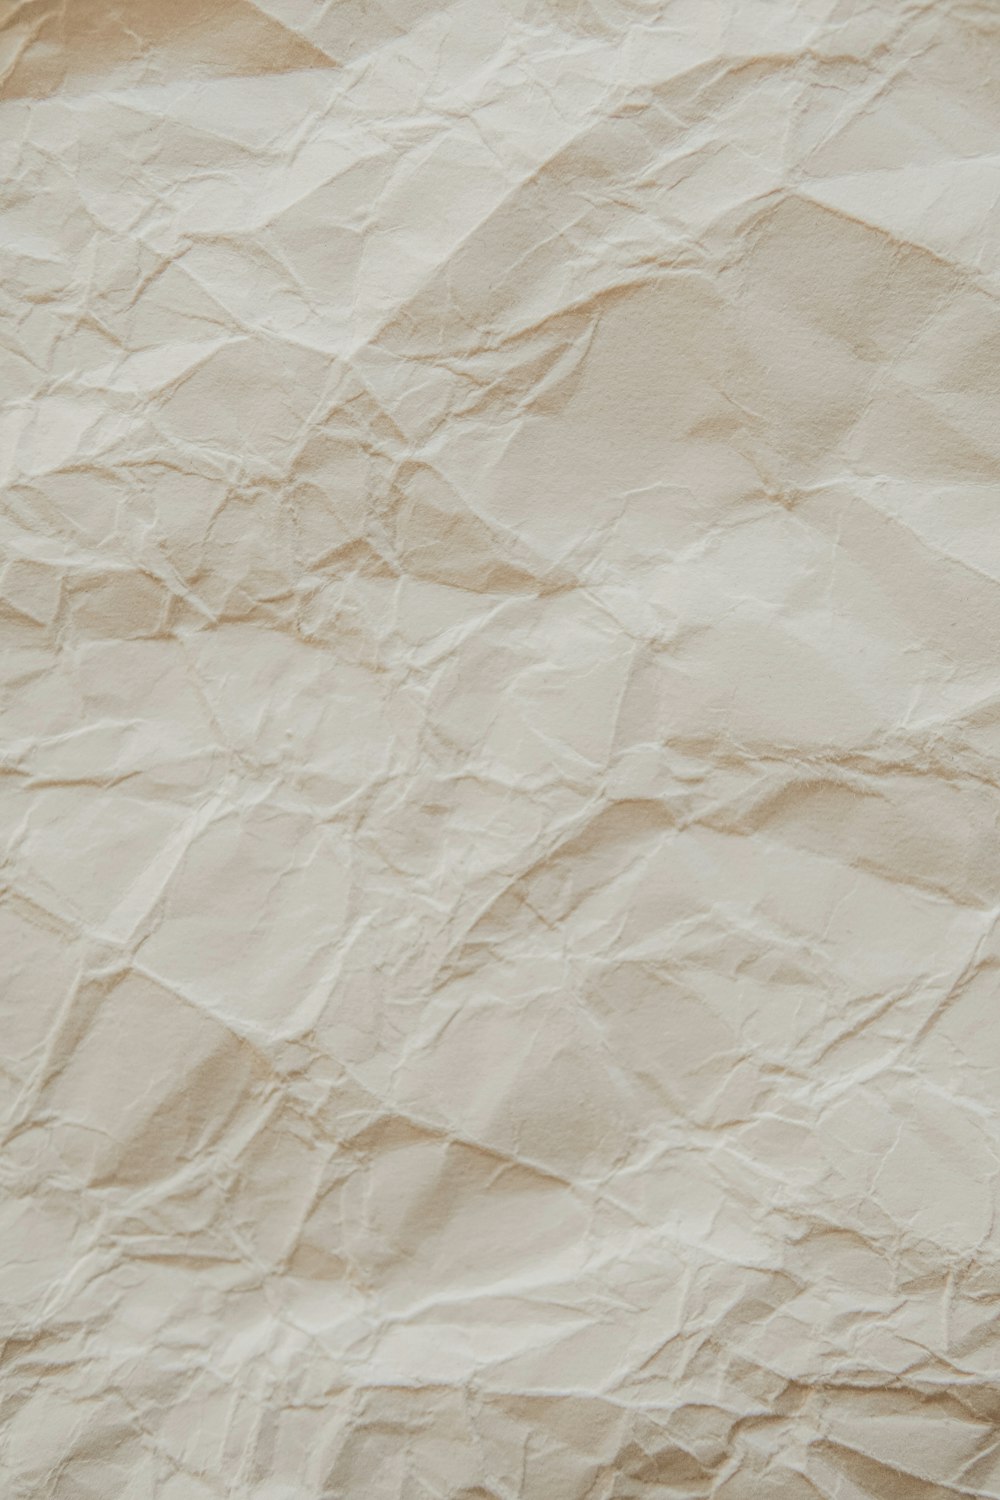 500+ Paper Texture Pictures [HD] | Download Free Images on Unsplash